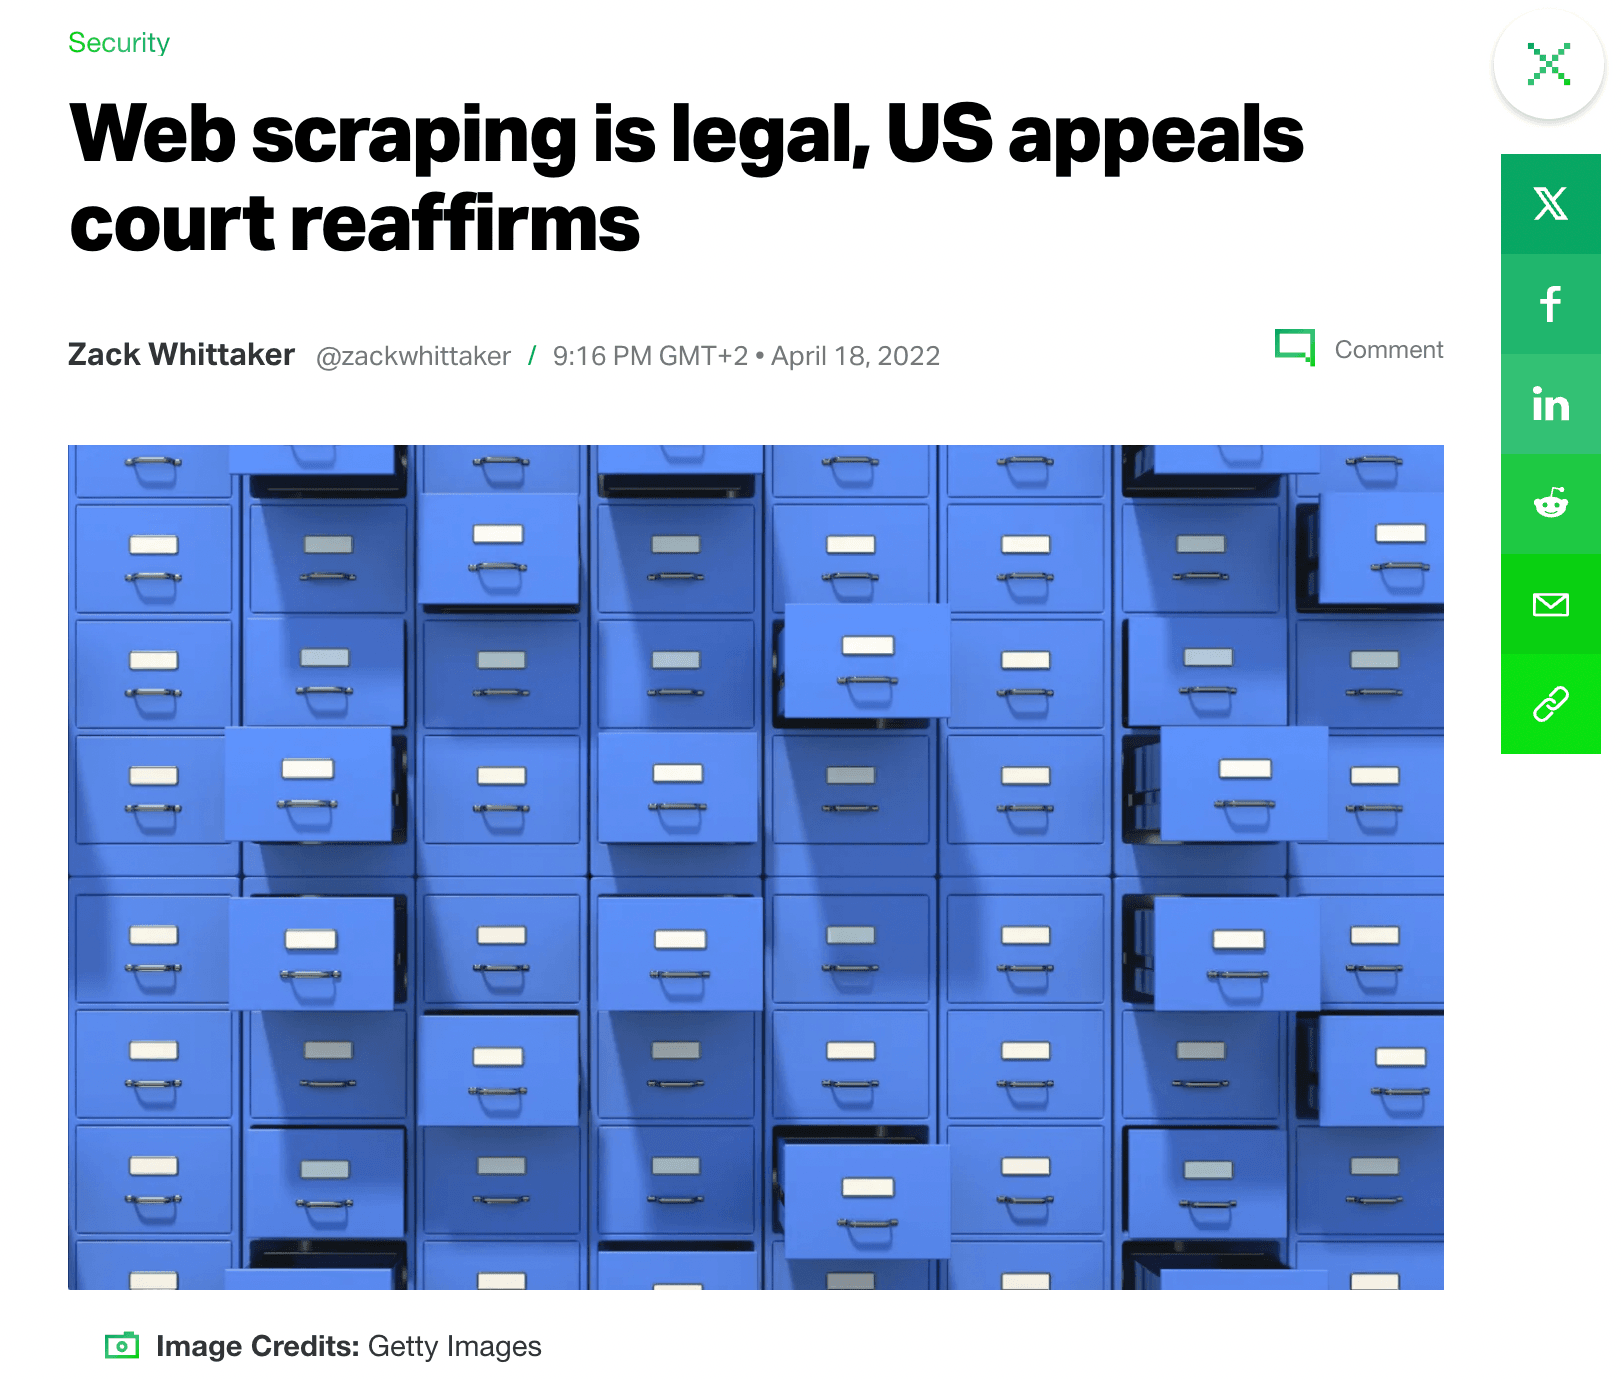 webscraping is legal techcrunch - image8.png